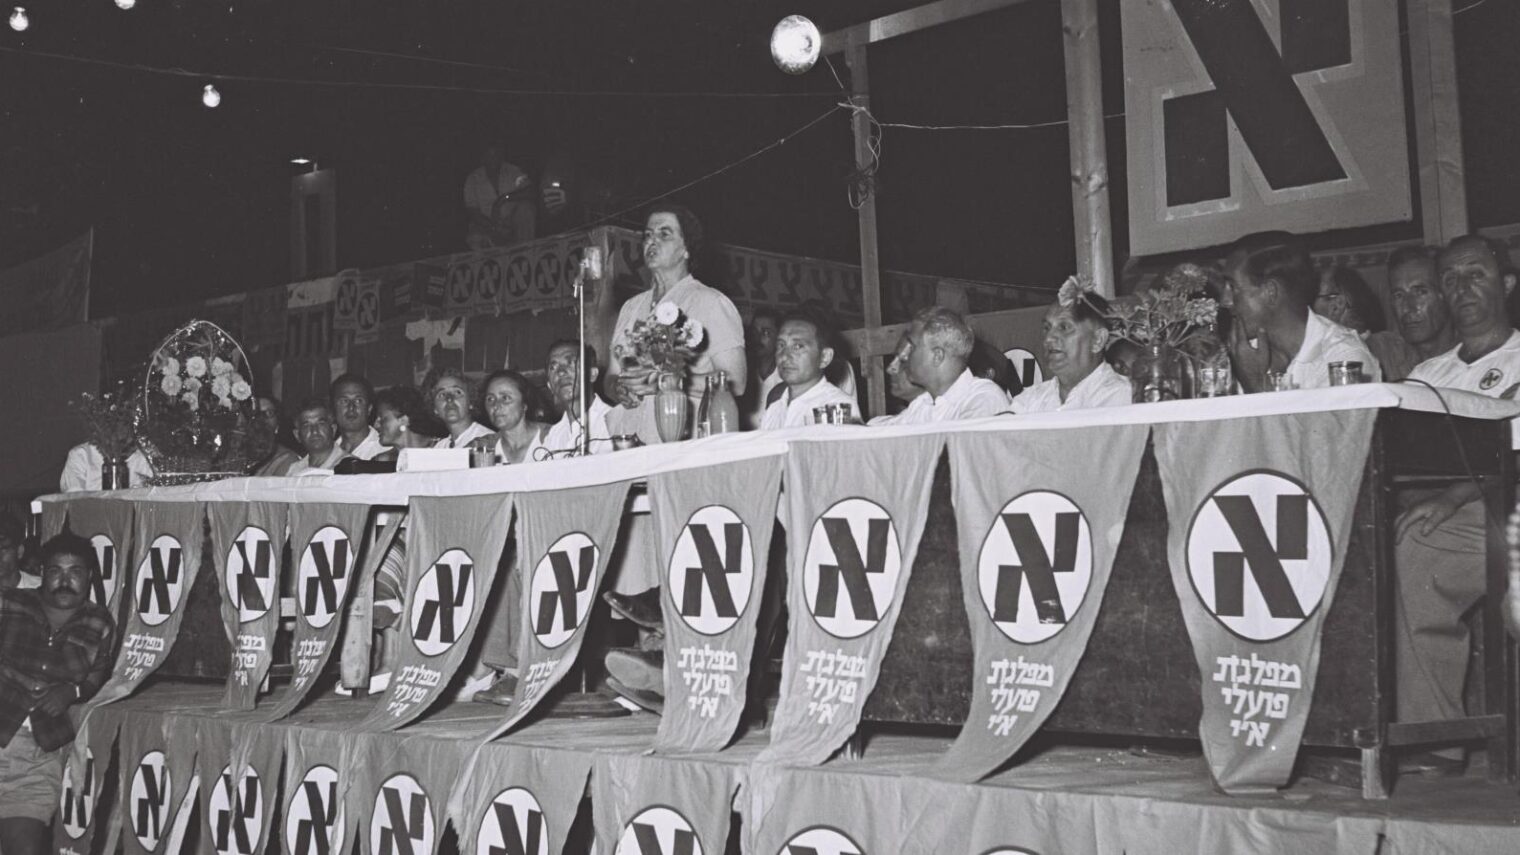 Golda Meyerson (Meir) speaking at a Mapai Labor Party event during the 1955 municipal election campaign. Photo by Moshe Pridan/GPO